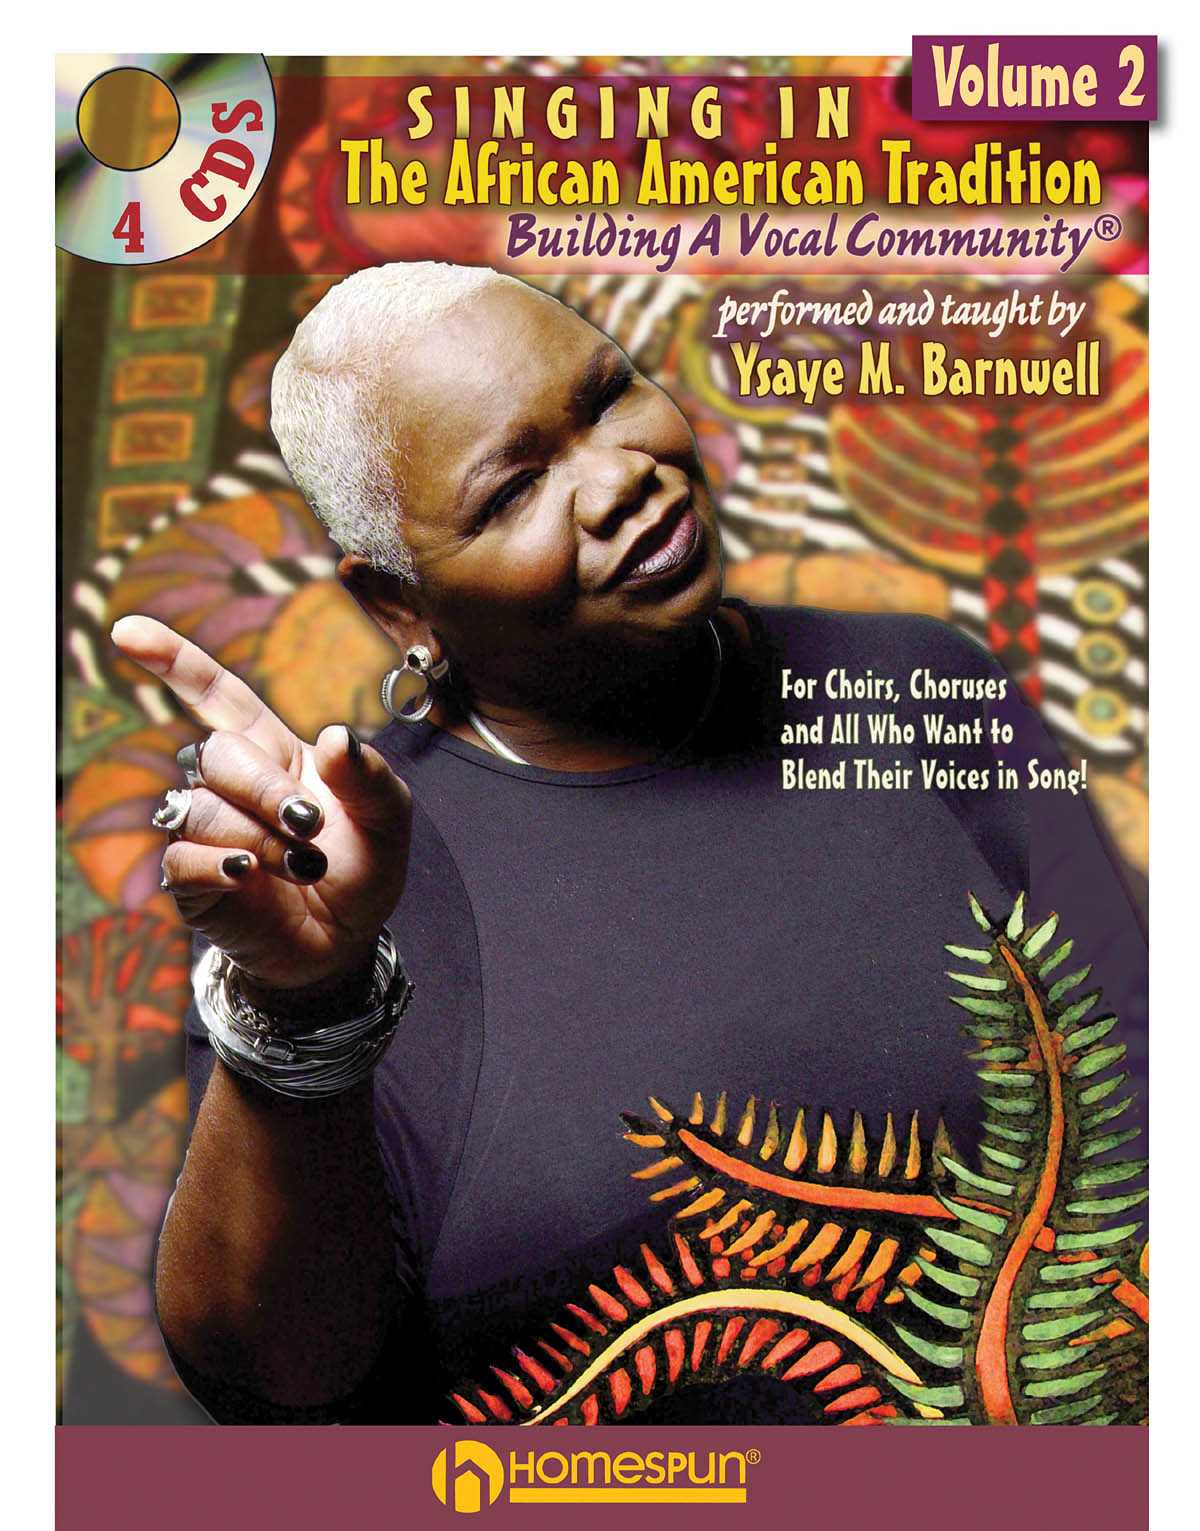 Image 1 of Singing in the African American Tradition - Volume 2 - SKU# 300-608 : Product Type Media : Elderly Instruments